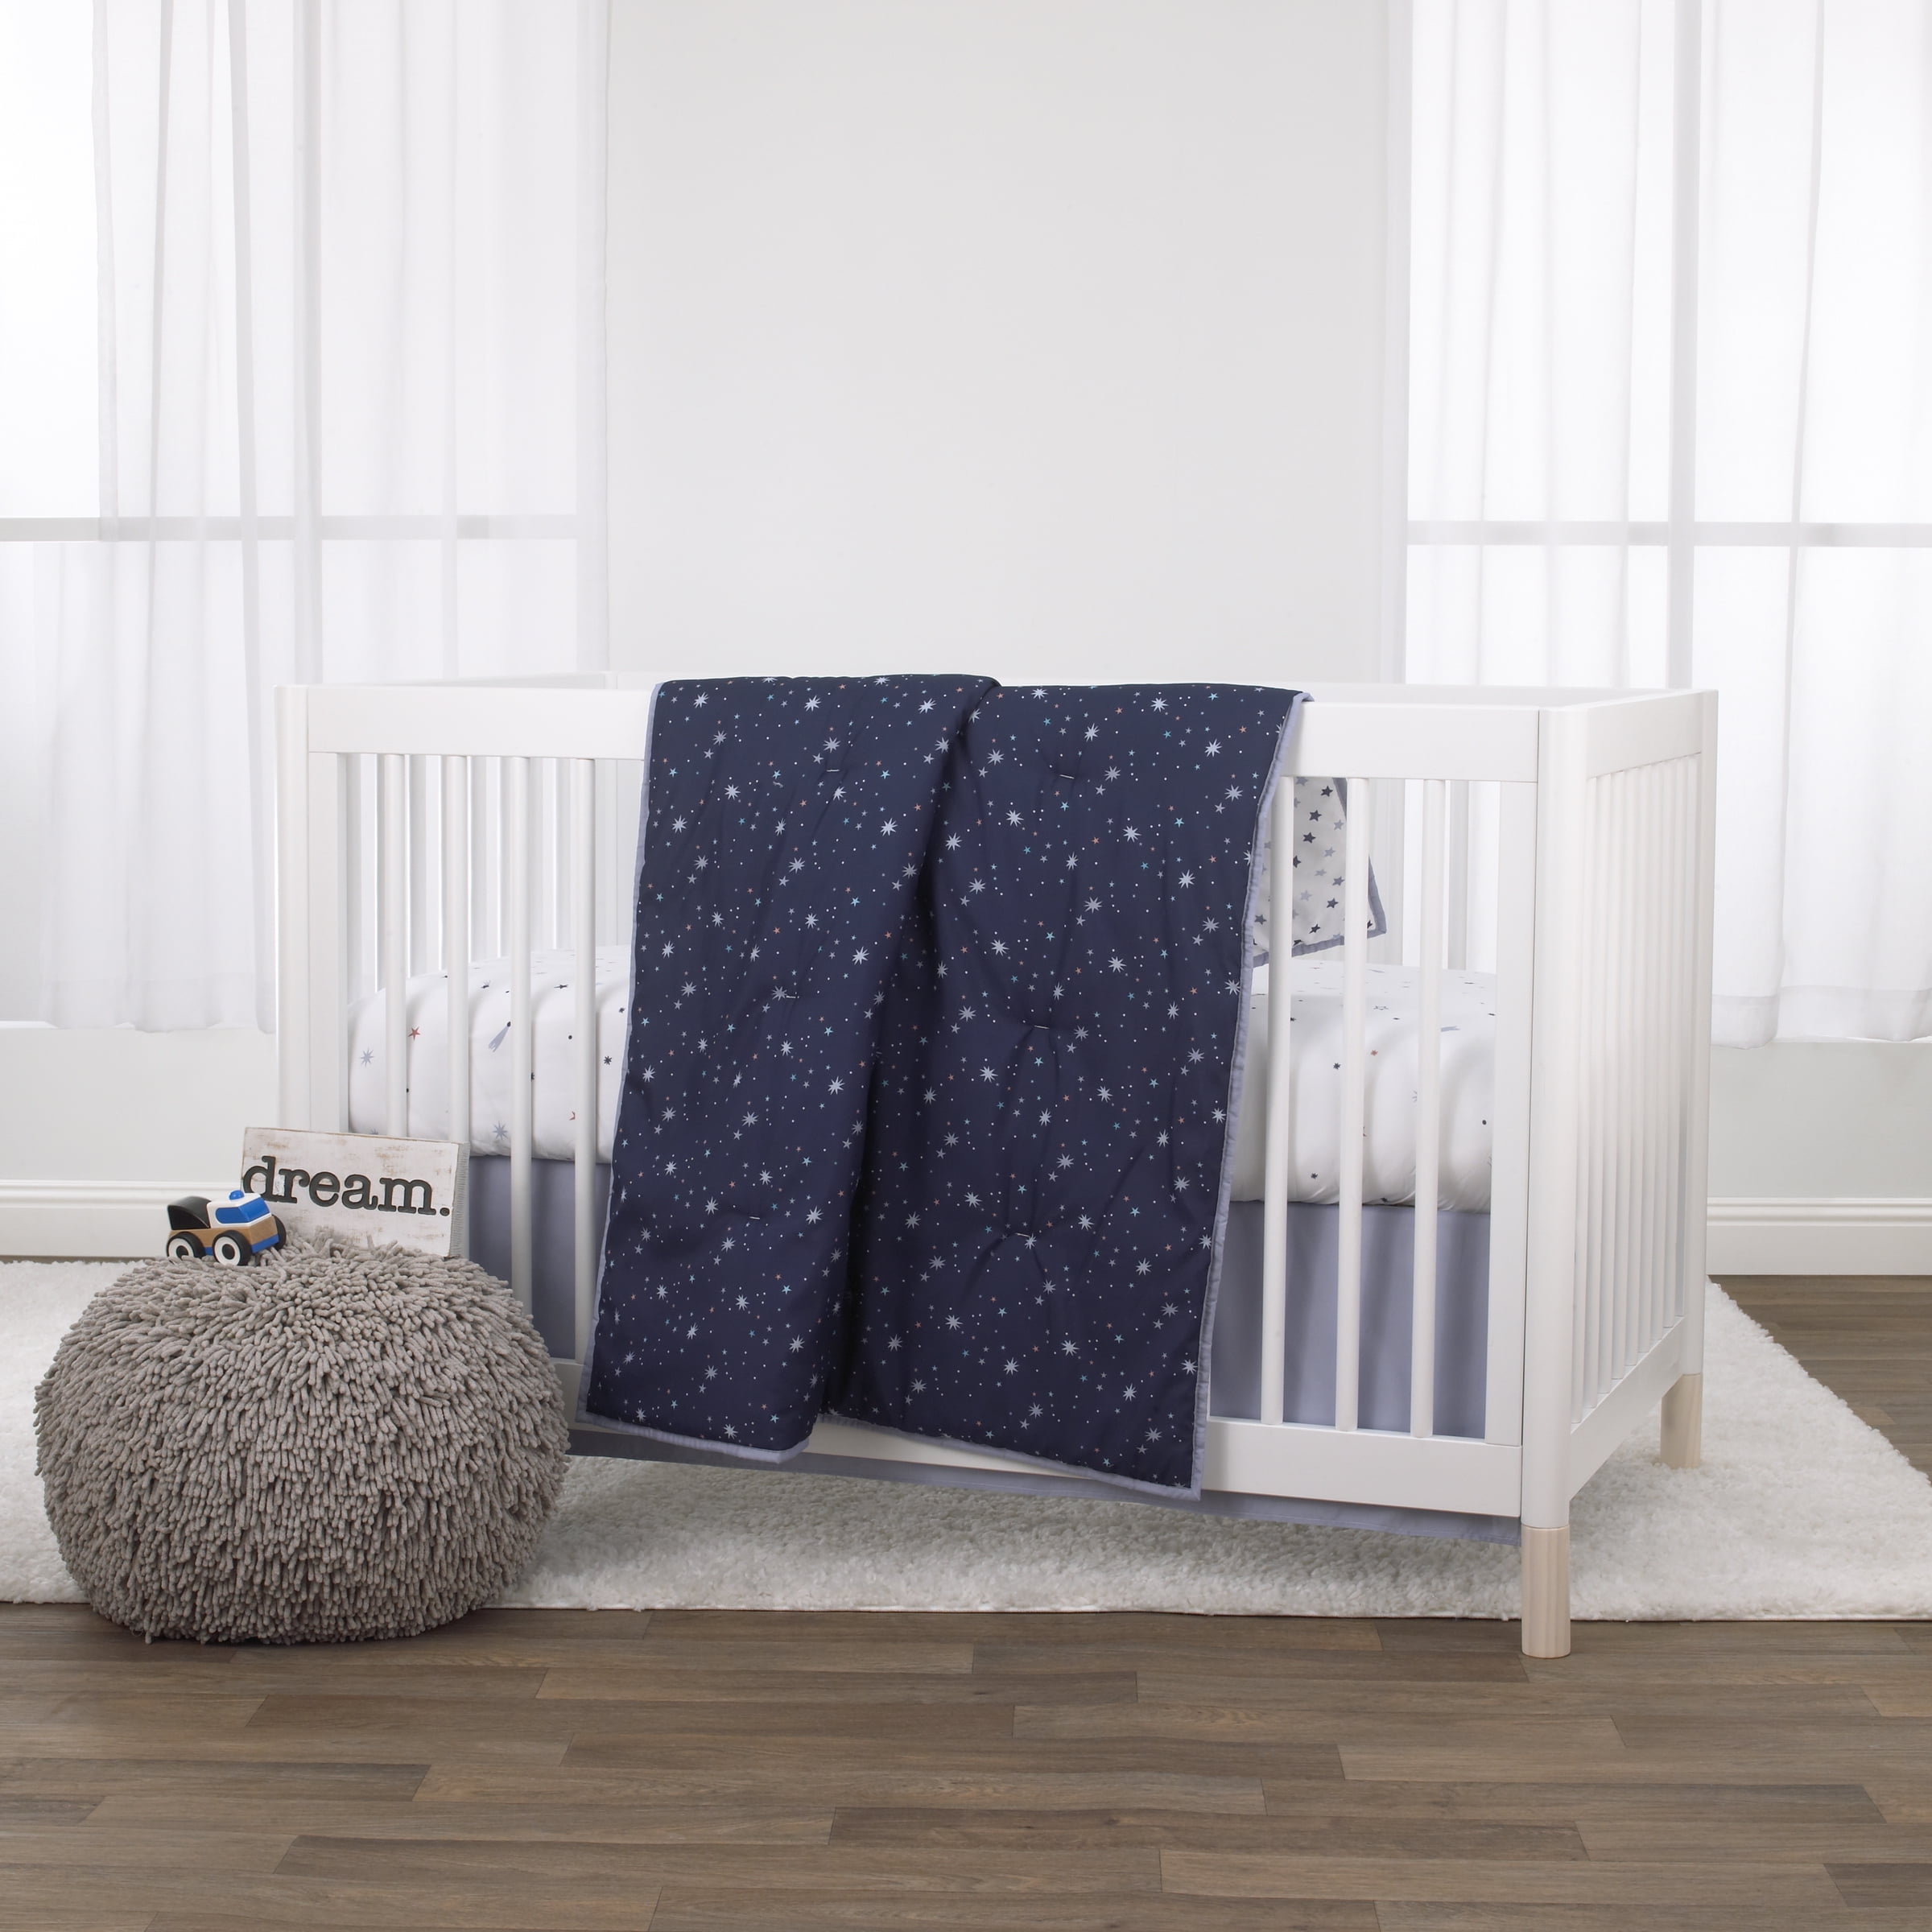 Little Love By Nojo Celestial 3 Piece Crib Bedding Set Navy Grey And White Comforter Fitted Crib Sheet And Dust Ruffle Walmart Com Walmart Com